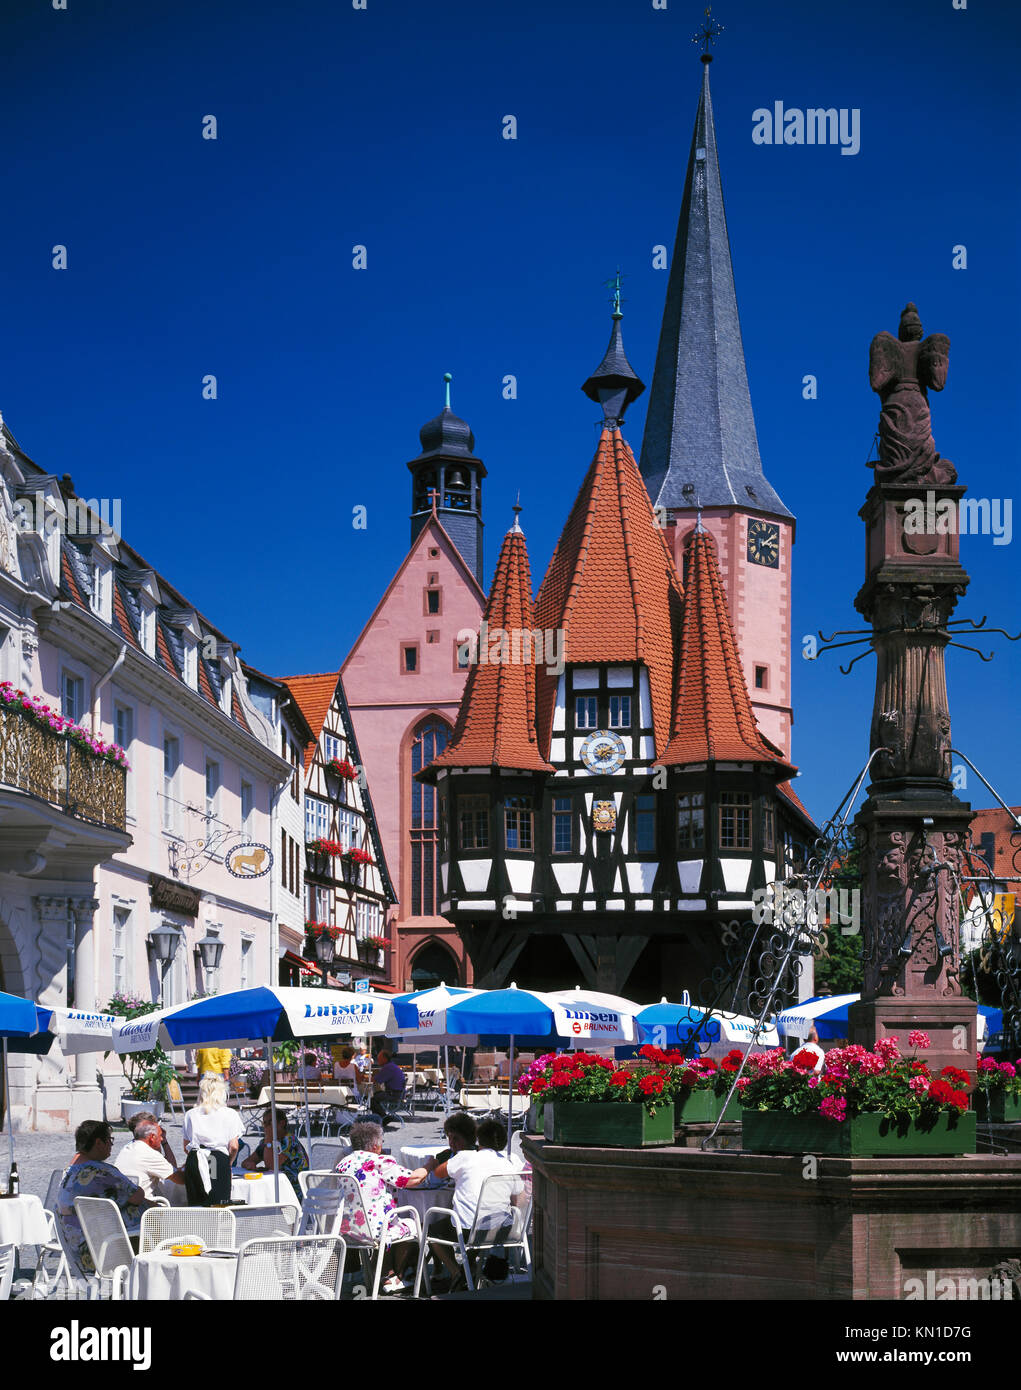 Historical city hall, market place, half-timbered houses, Michelstadt, Odenwald, Hesse, Germany. Stock Photo